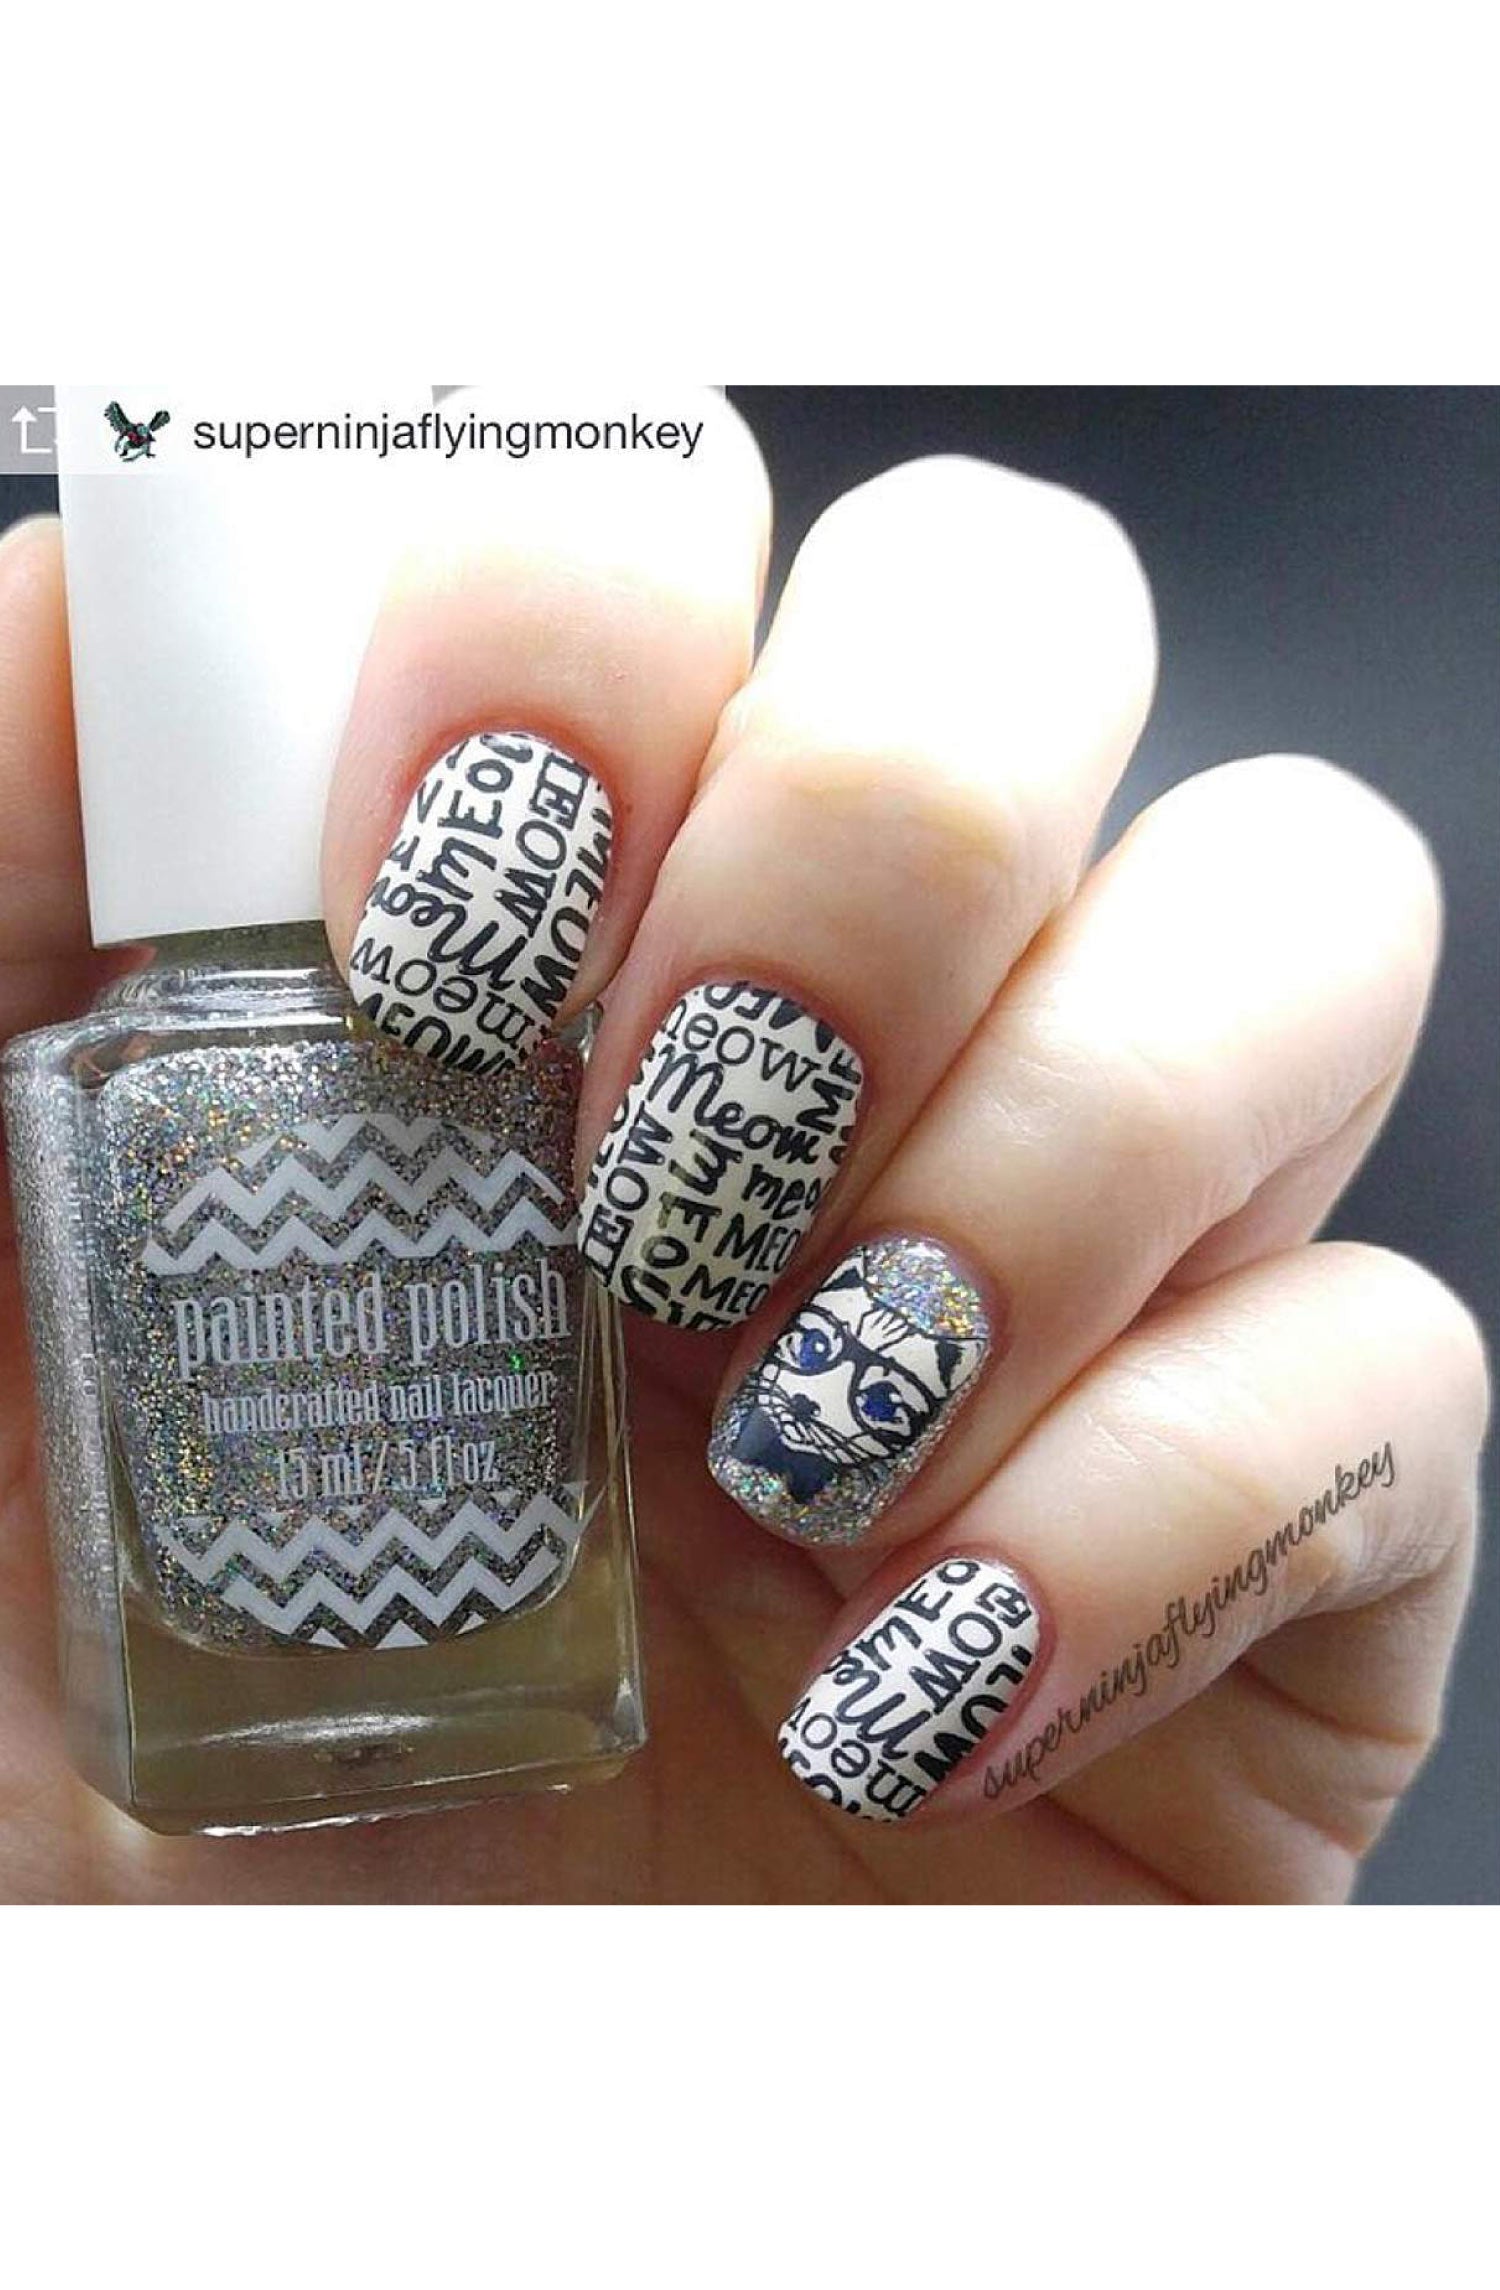 What are some photos of your best nail designs? - Nail Art and Stamping -  Quora